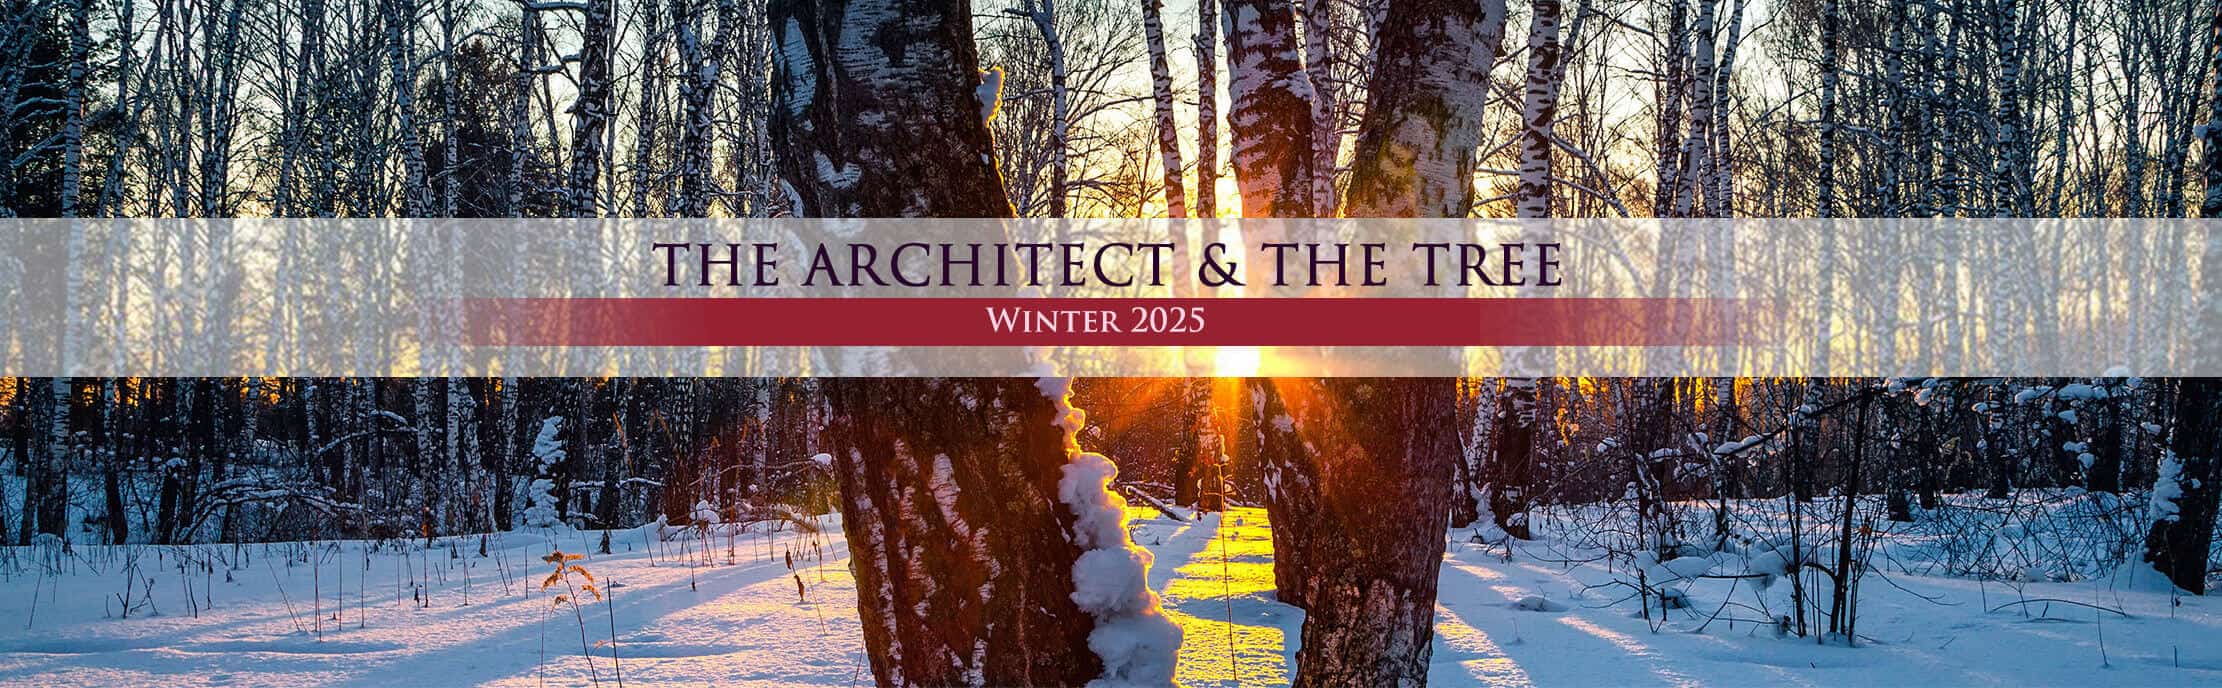 The Architect & the Tree Banner